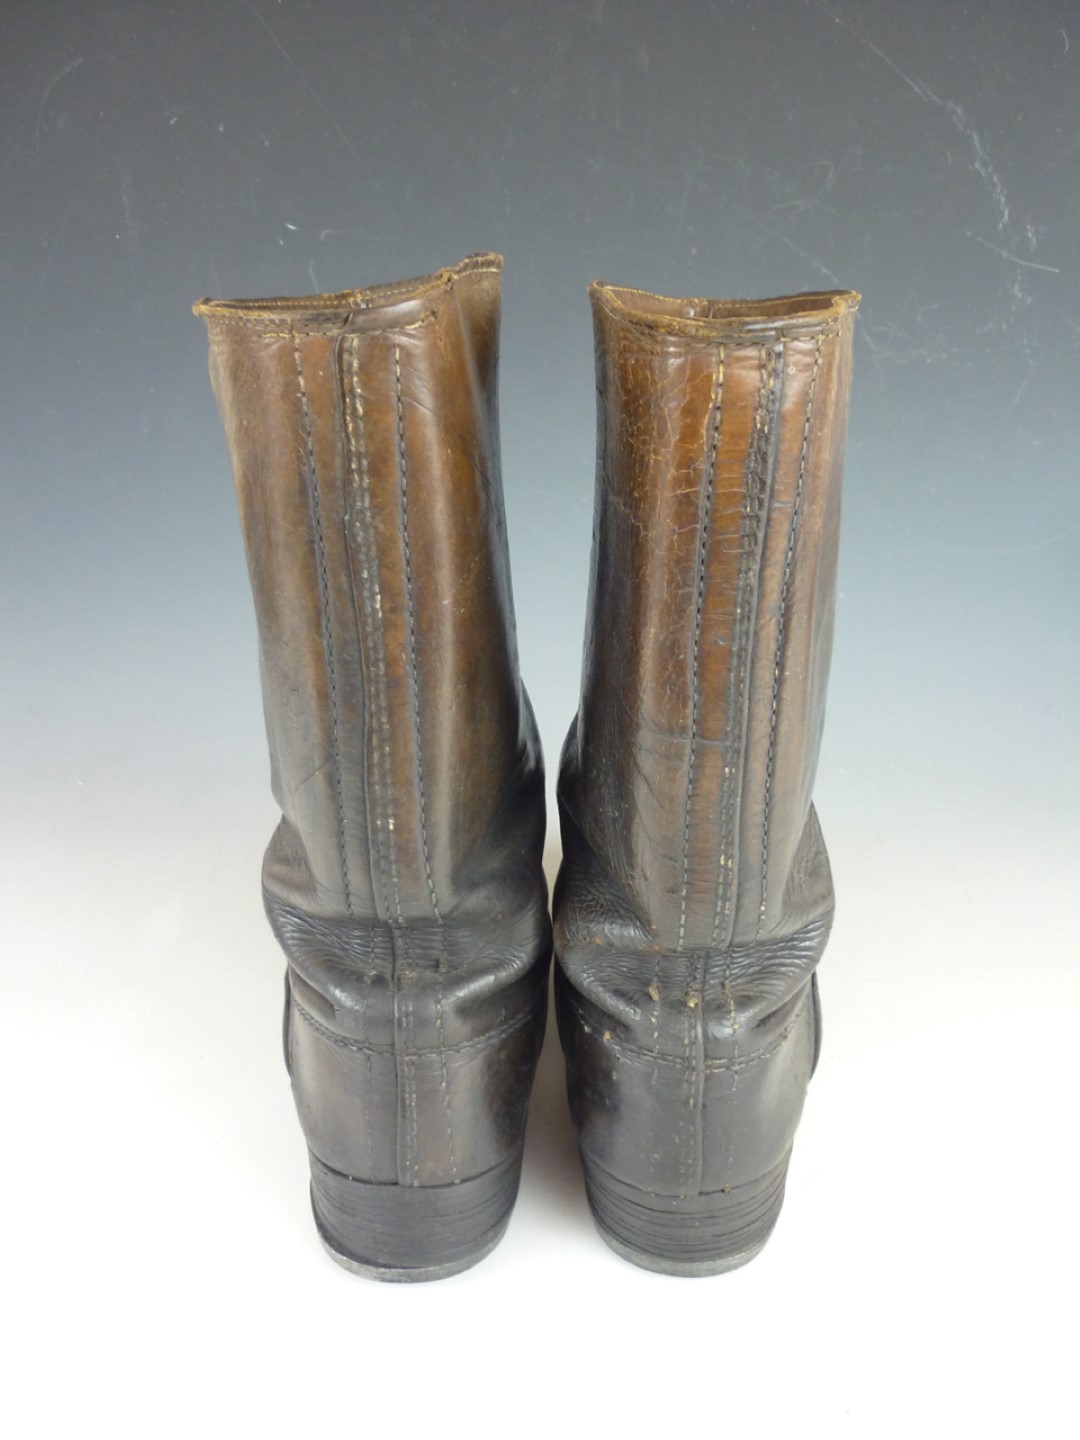 A pair of Second World War German Wehrmacht issue boots - Image 2 of 3